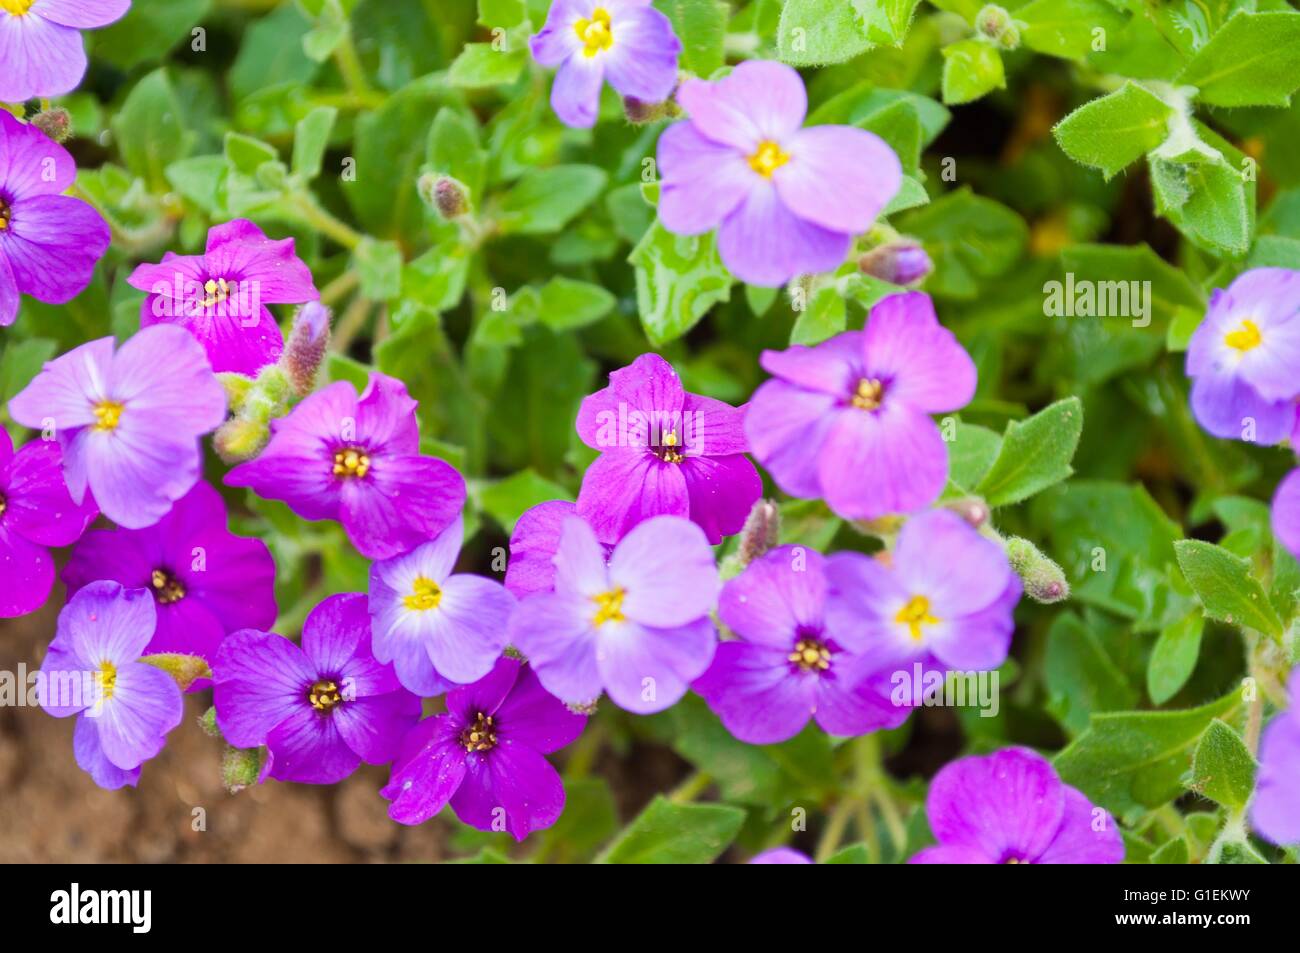 Close up of purple blossoms of Aubrieta flowers in a garden Stock Photo